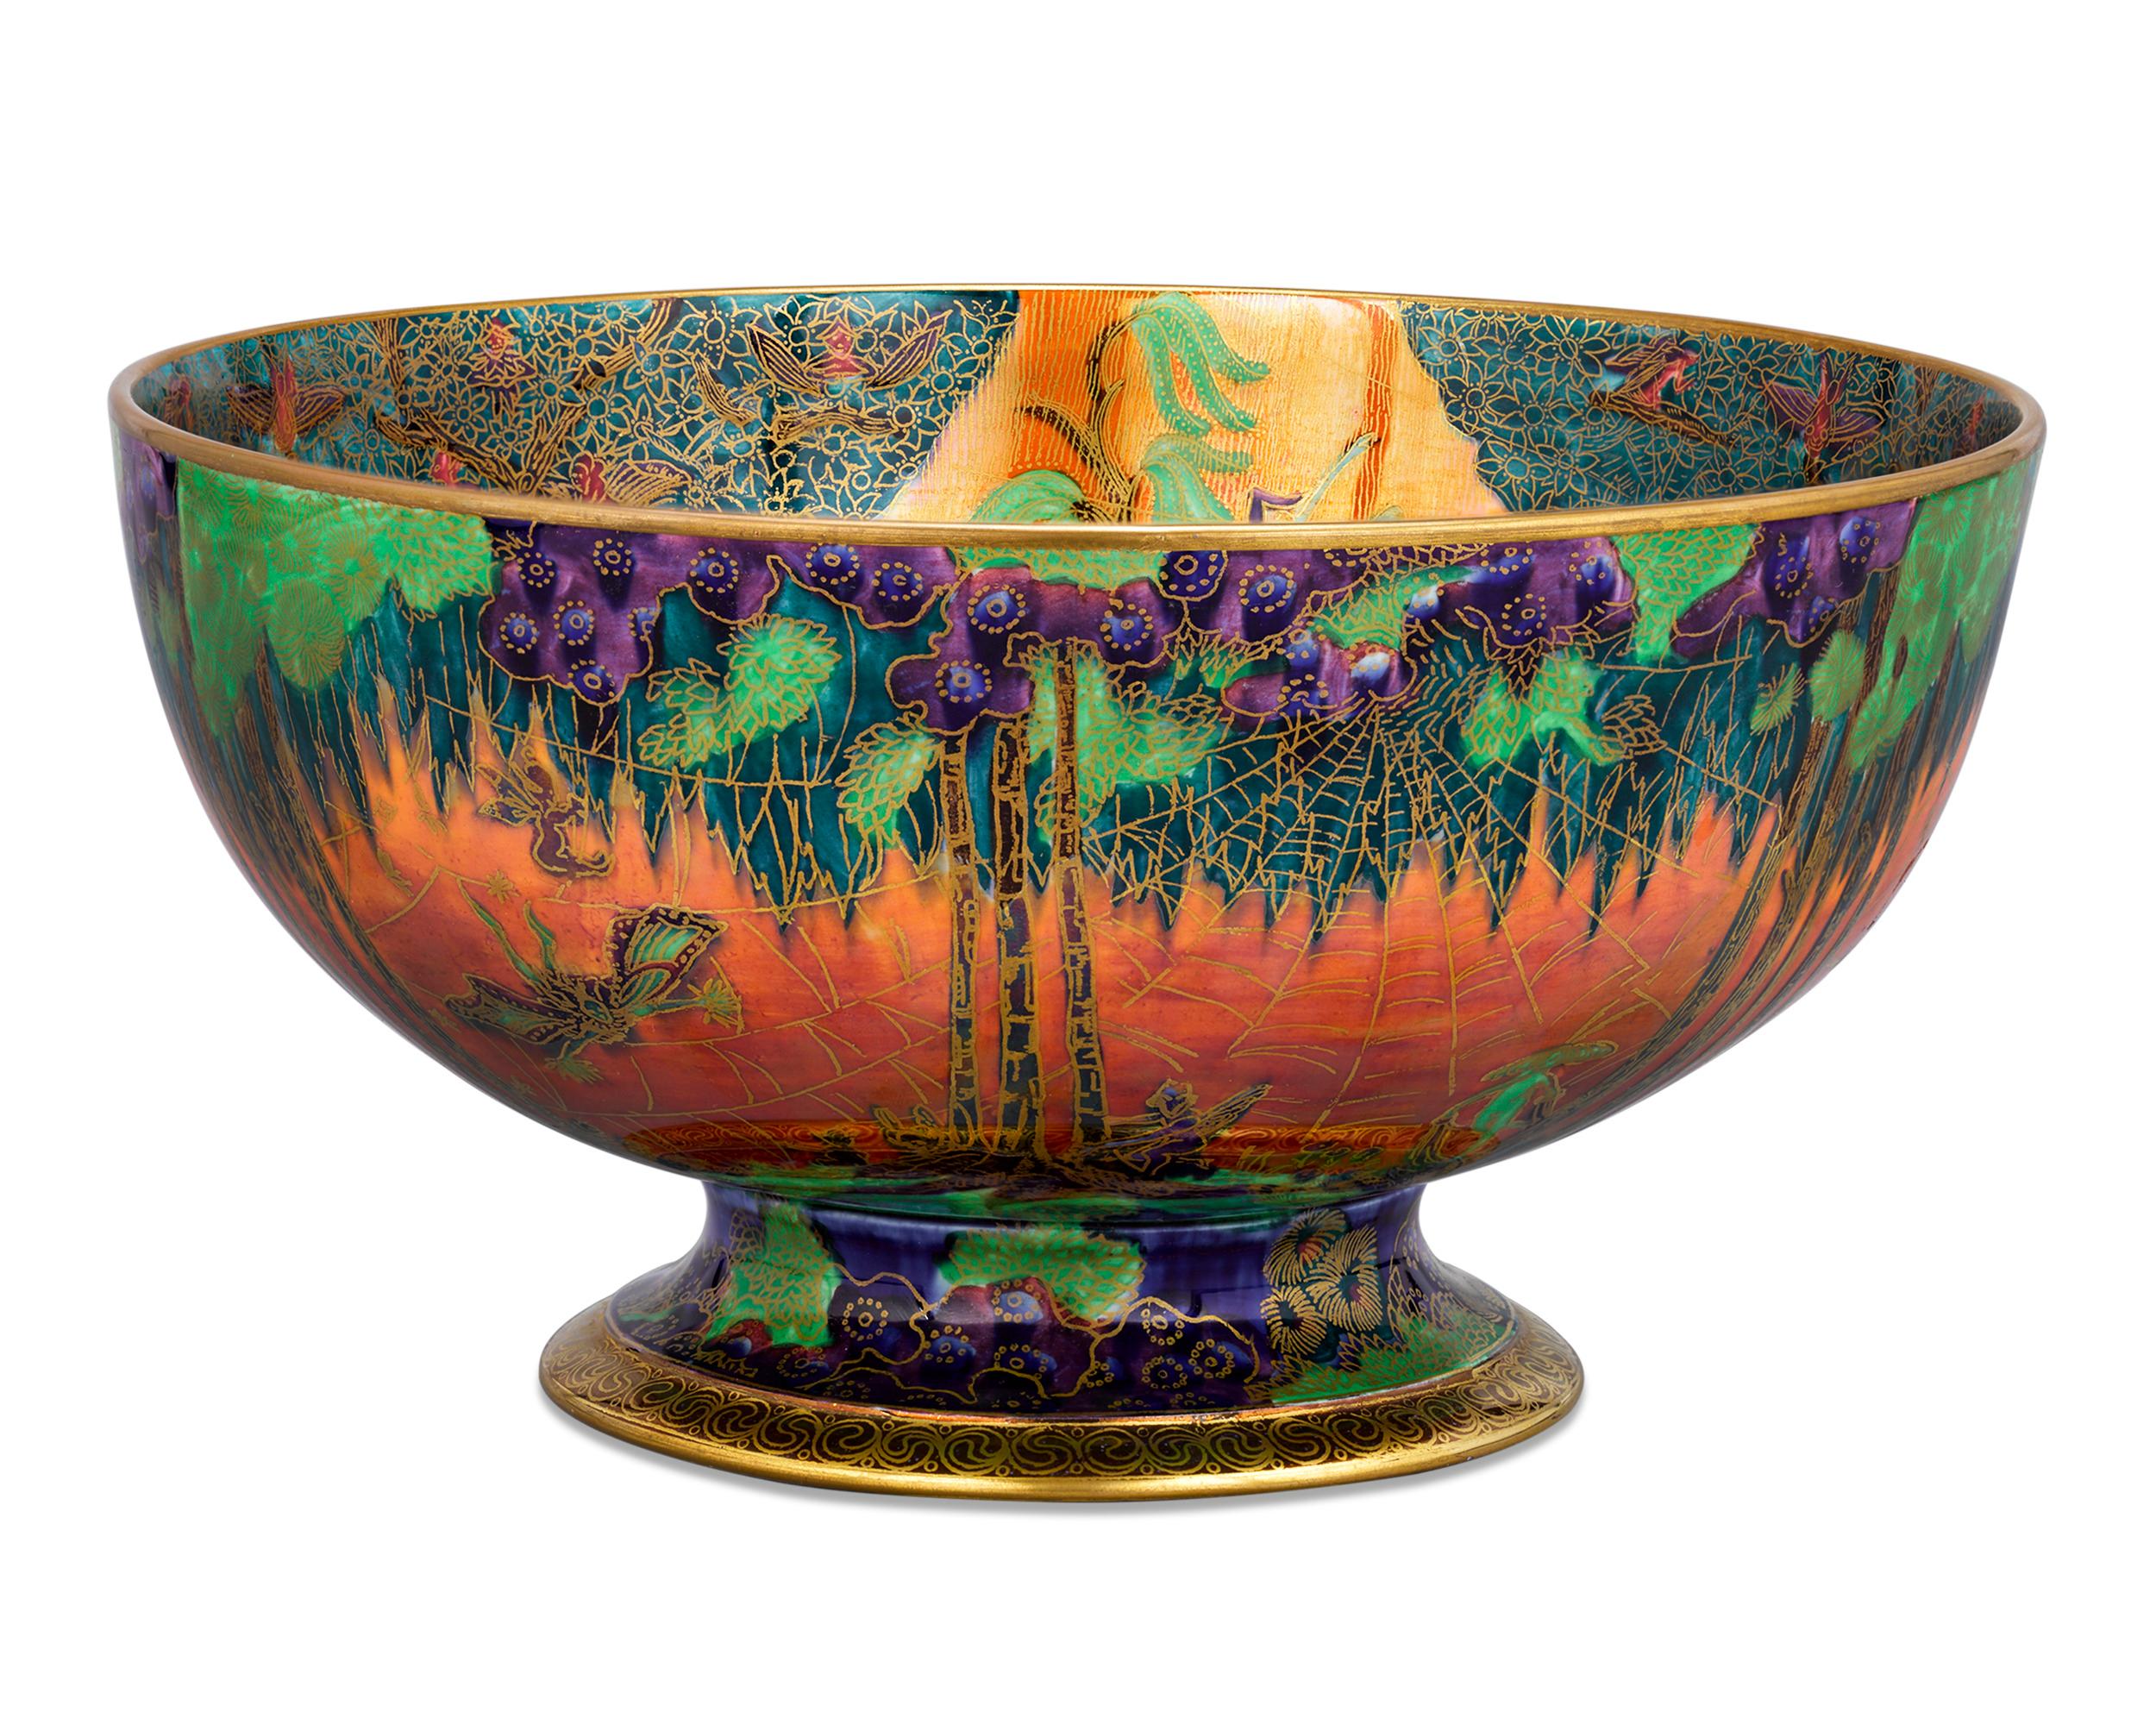 This highly imaginative Wedgwood porcelain bowl hails from the extraordinary collection created by Daisy Makeig-Jones known as Fairyland Lustre. Taking its inspiration from fairy tales, the Fairyland line brings together wild combinations of colors